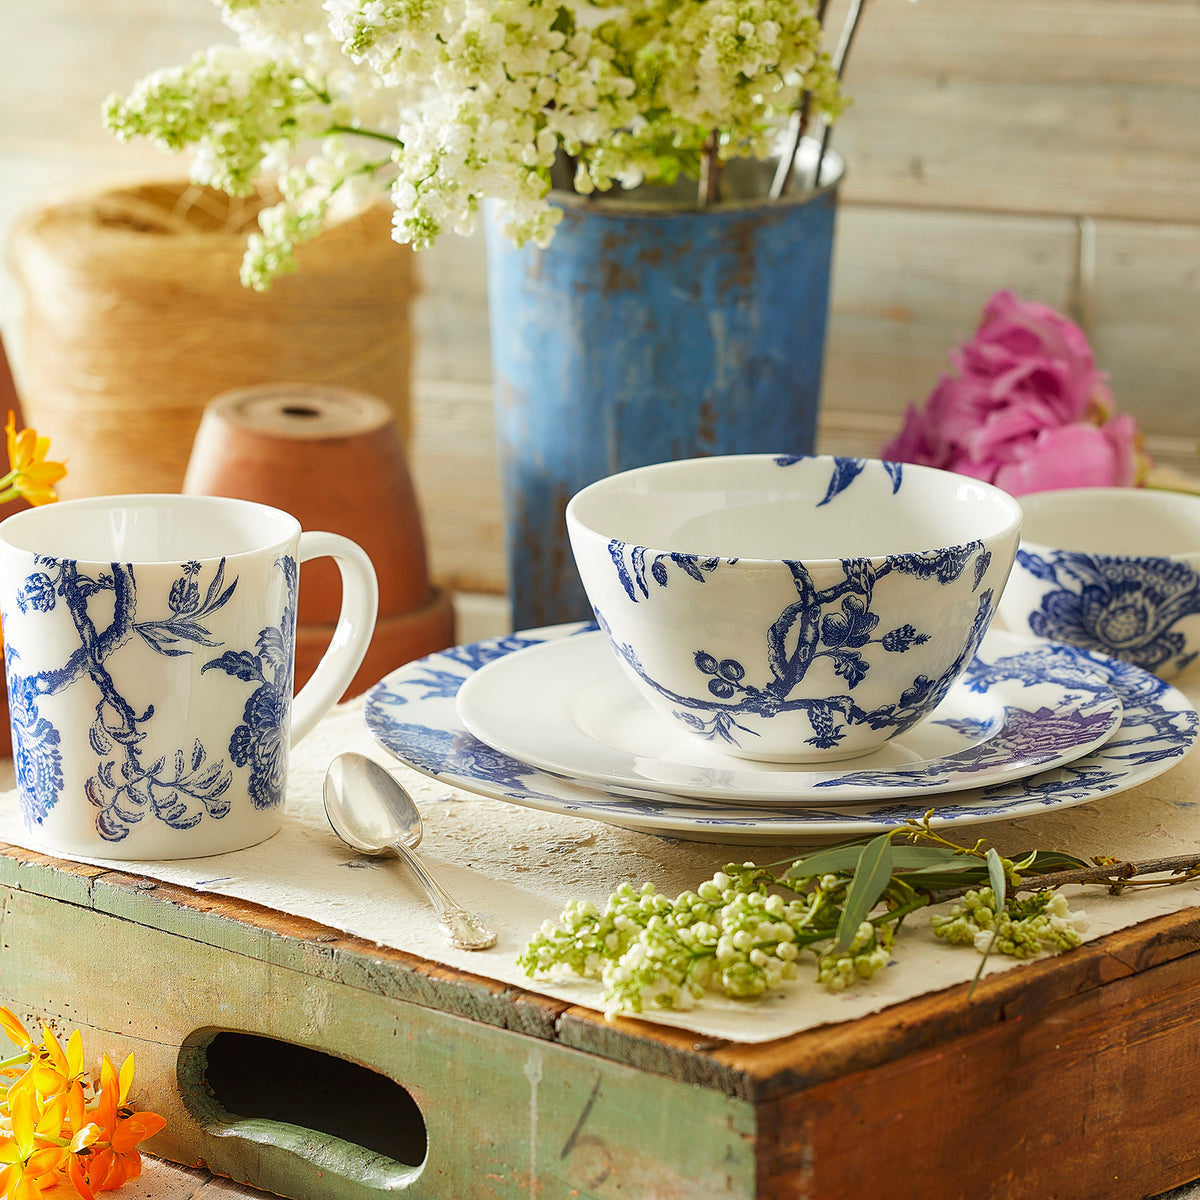 The Blue Arcadia Tall Cereal Bowl, shown here with the rest of the dinnerware collection in a garden scene.